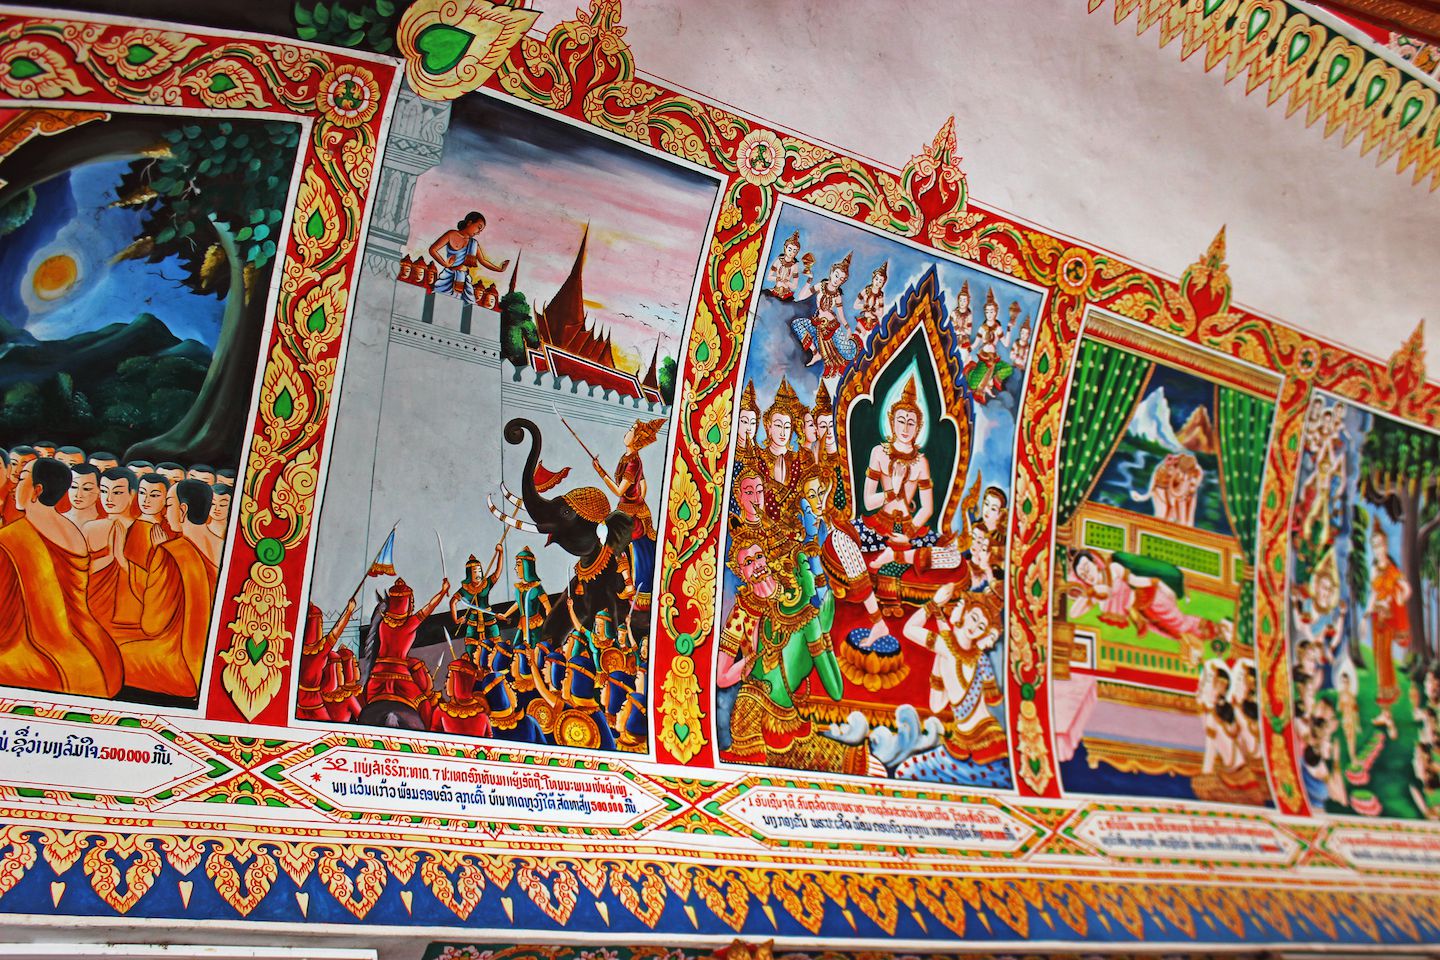 Paintings on the walls of Vat That Luang Tai, Vientiane, Laos